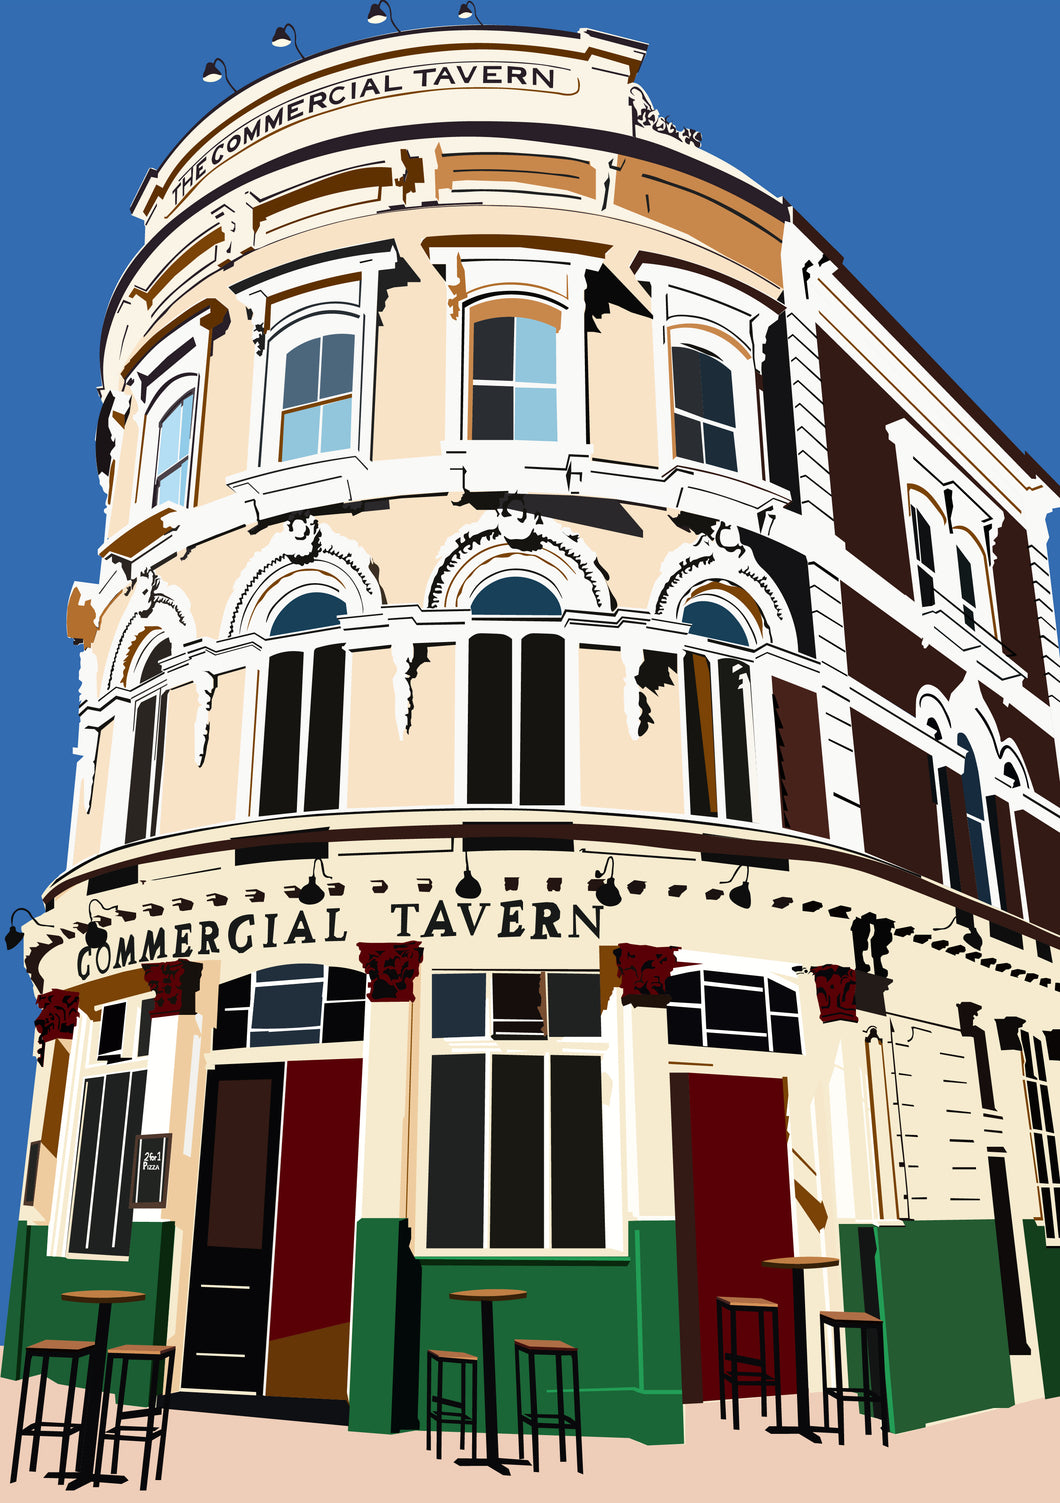 Commercial Tavern, Pubs of Shoreditch